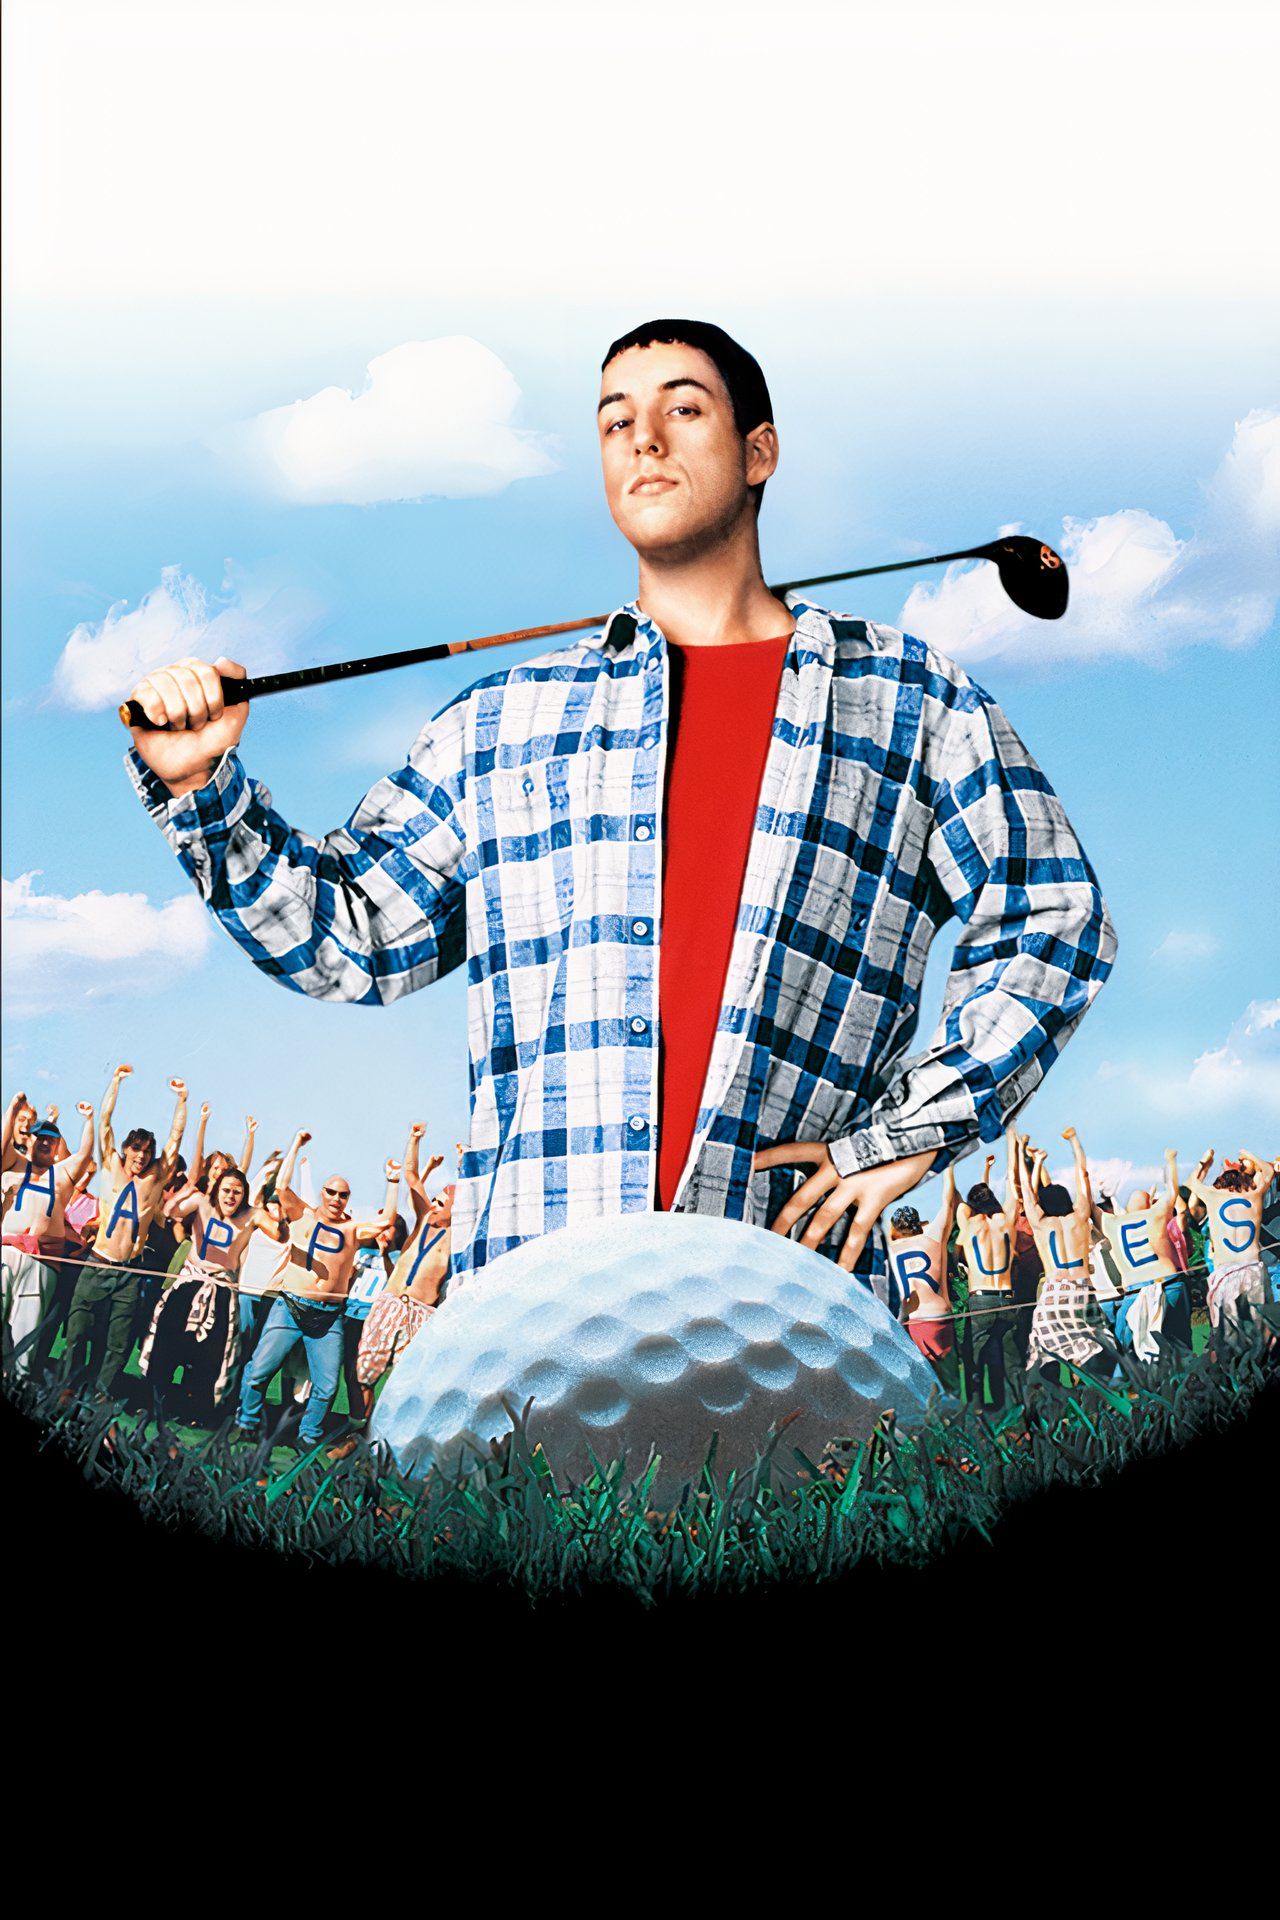 Happy Gilmore Textless Poster Showing Adam Sandler Holding a Golf Club Looking Down at a Ball